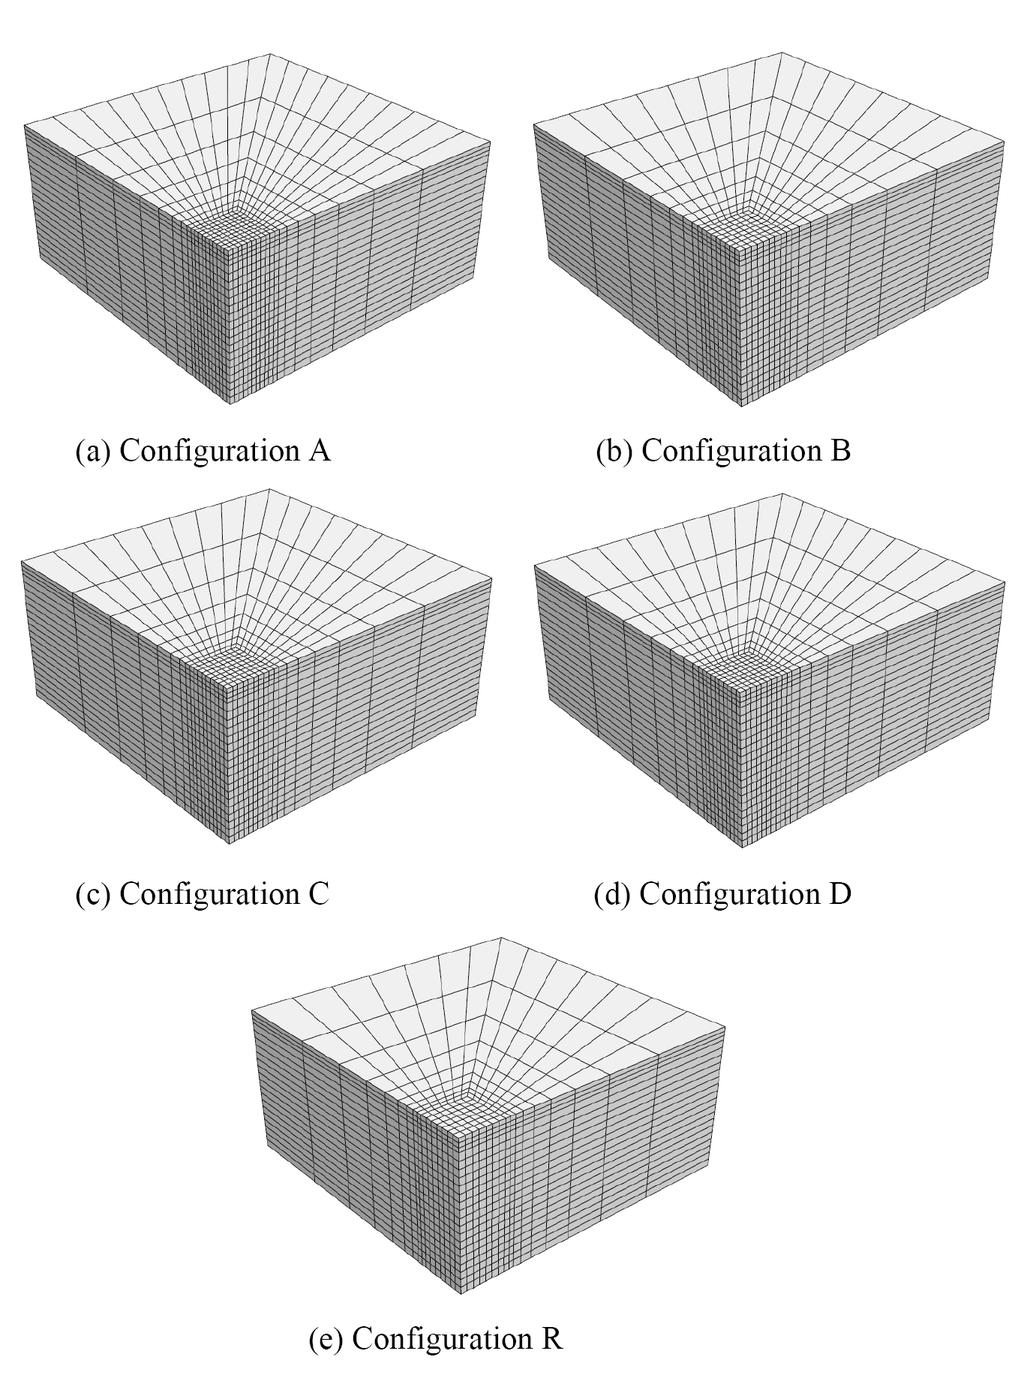 Figure 8 shows the patterns of the grid for the different pile configurations and the shell structural elements representing the raft and the pile structural elements. Figure 8.